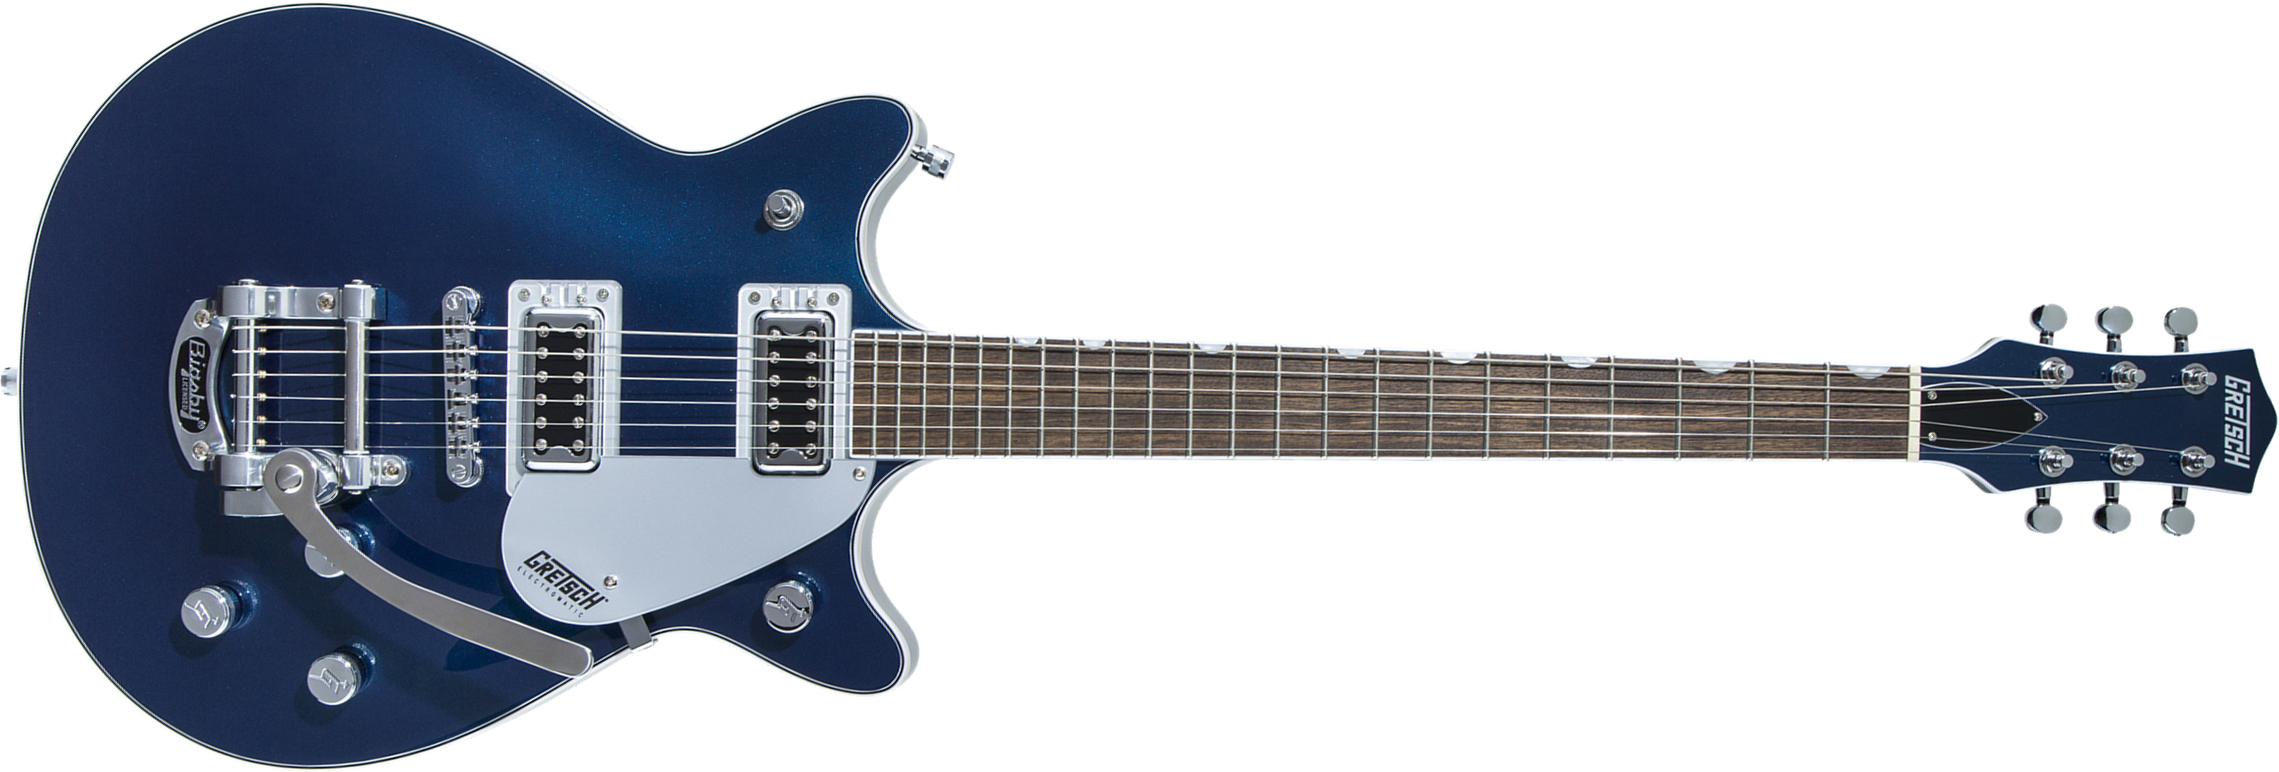 Gretsch G5232t Electromatic Double Jet Ft 2019 Hh Bigsby Lau - Midnight Sapphire - Double cut electric guitar - Main picture